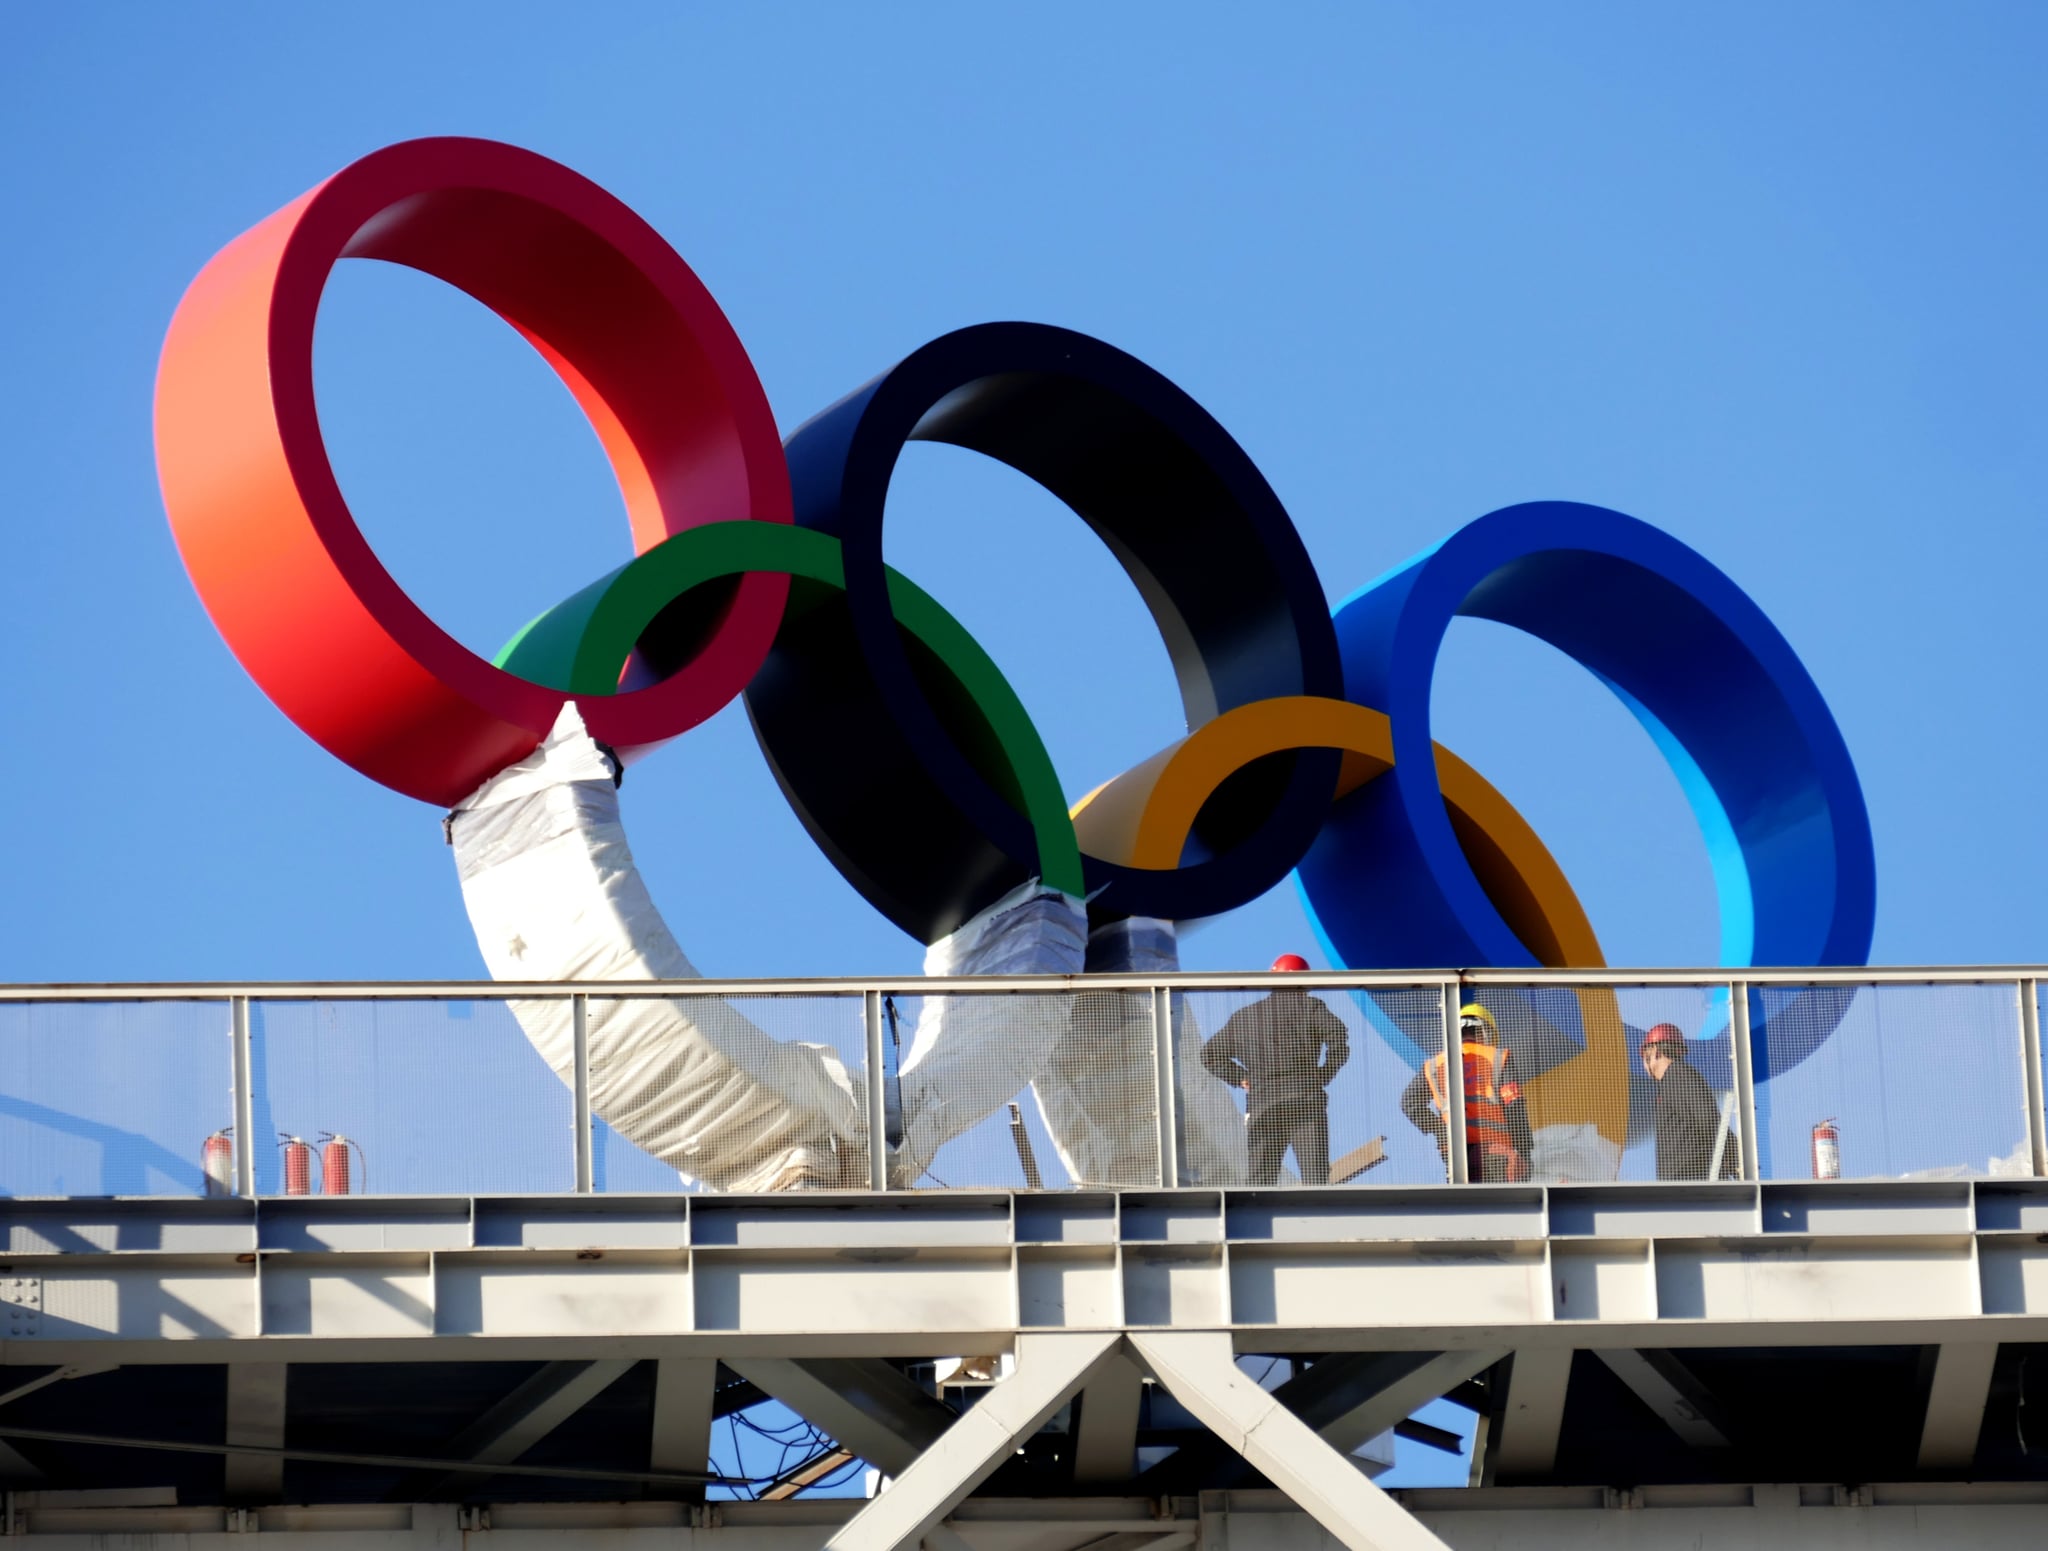 BEIJING, CHINA - OCTOBER 21: Workers install Olympic rings at Shougang Park on October 20, 2021 in Beijing, China. The Big Air Shougang at Shougang Park will host the big air freestyle skiing and snowboarding competitions of the Beijing 2022 Winter Olympic Games. (Photo by Li Wenming/VCG via Getty Images)